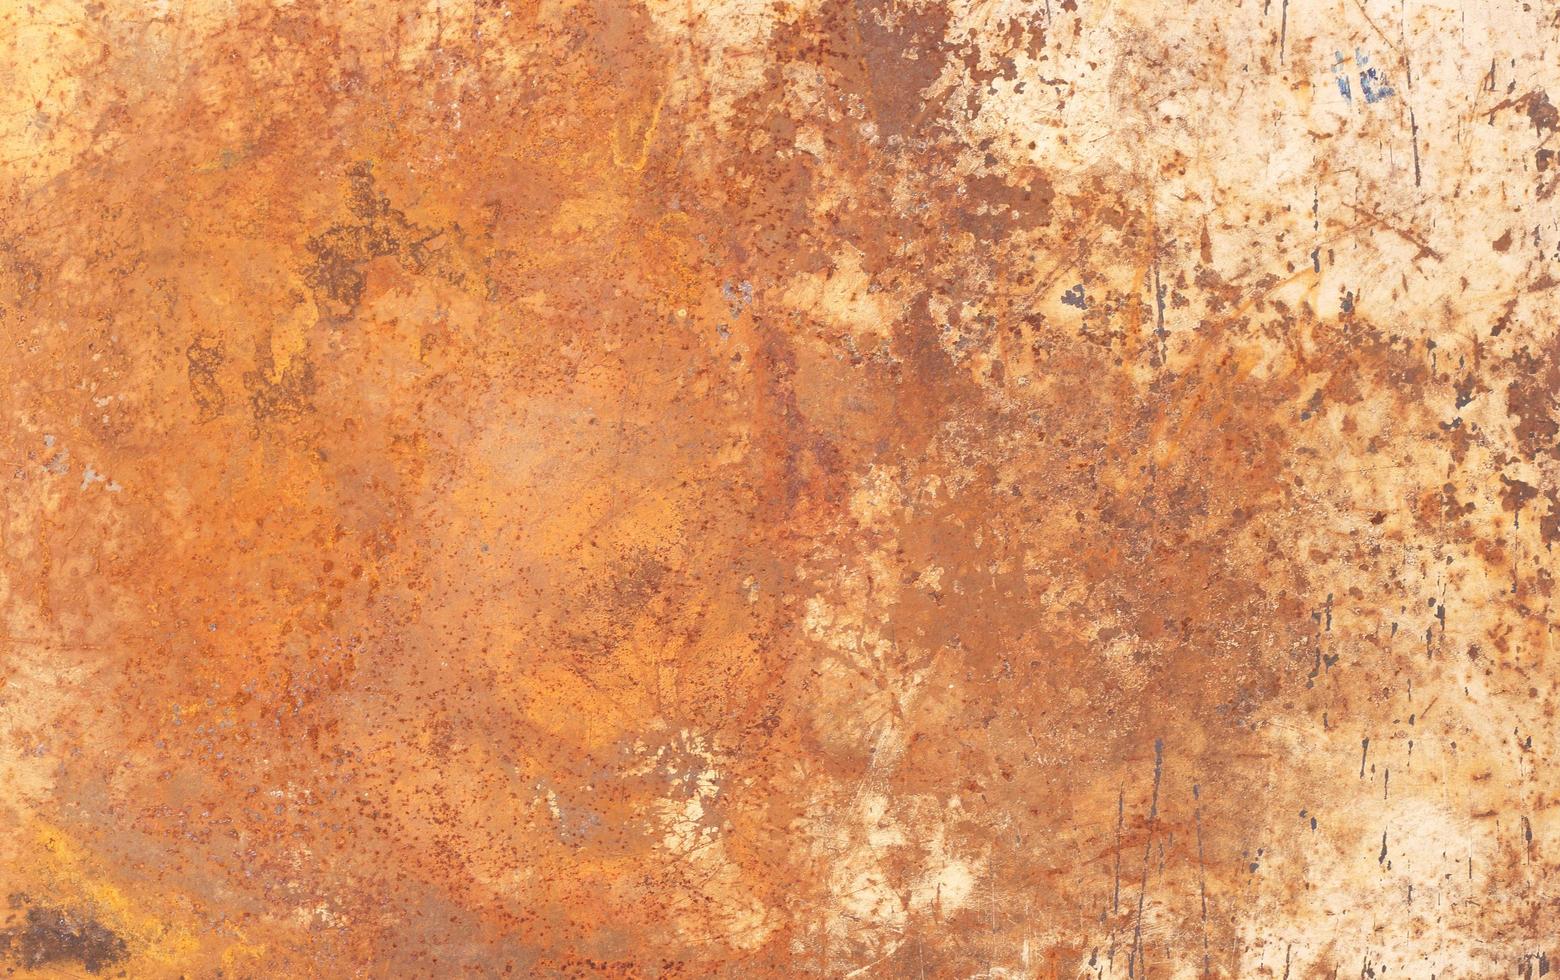 Recycled Materials - Sheet metal filled with orange-brown rust and scratches photo